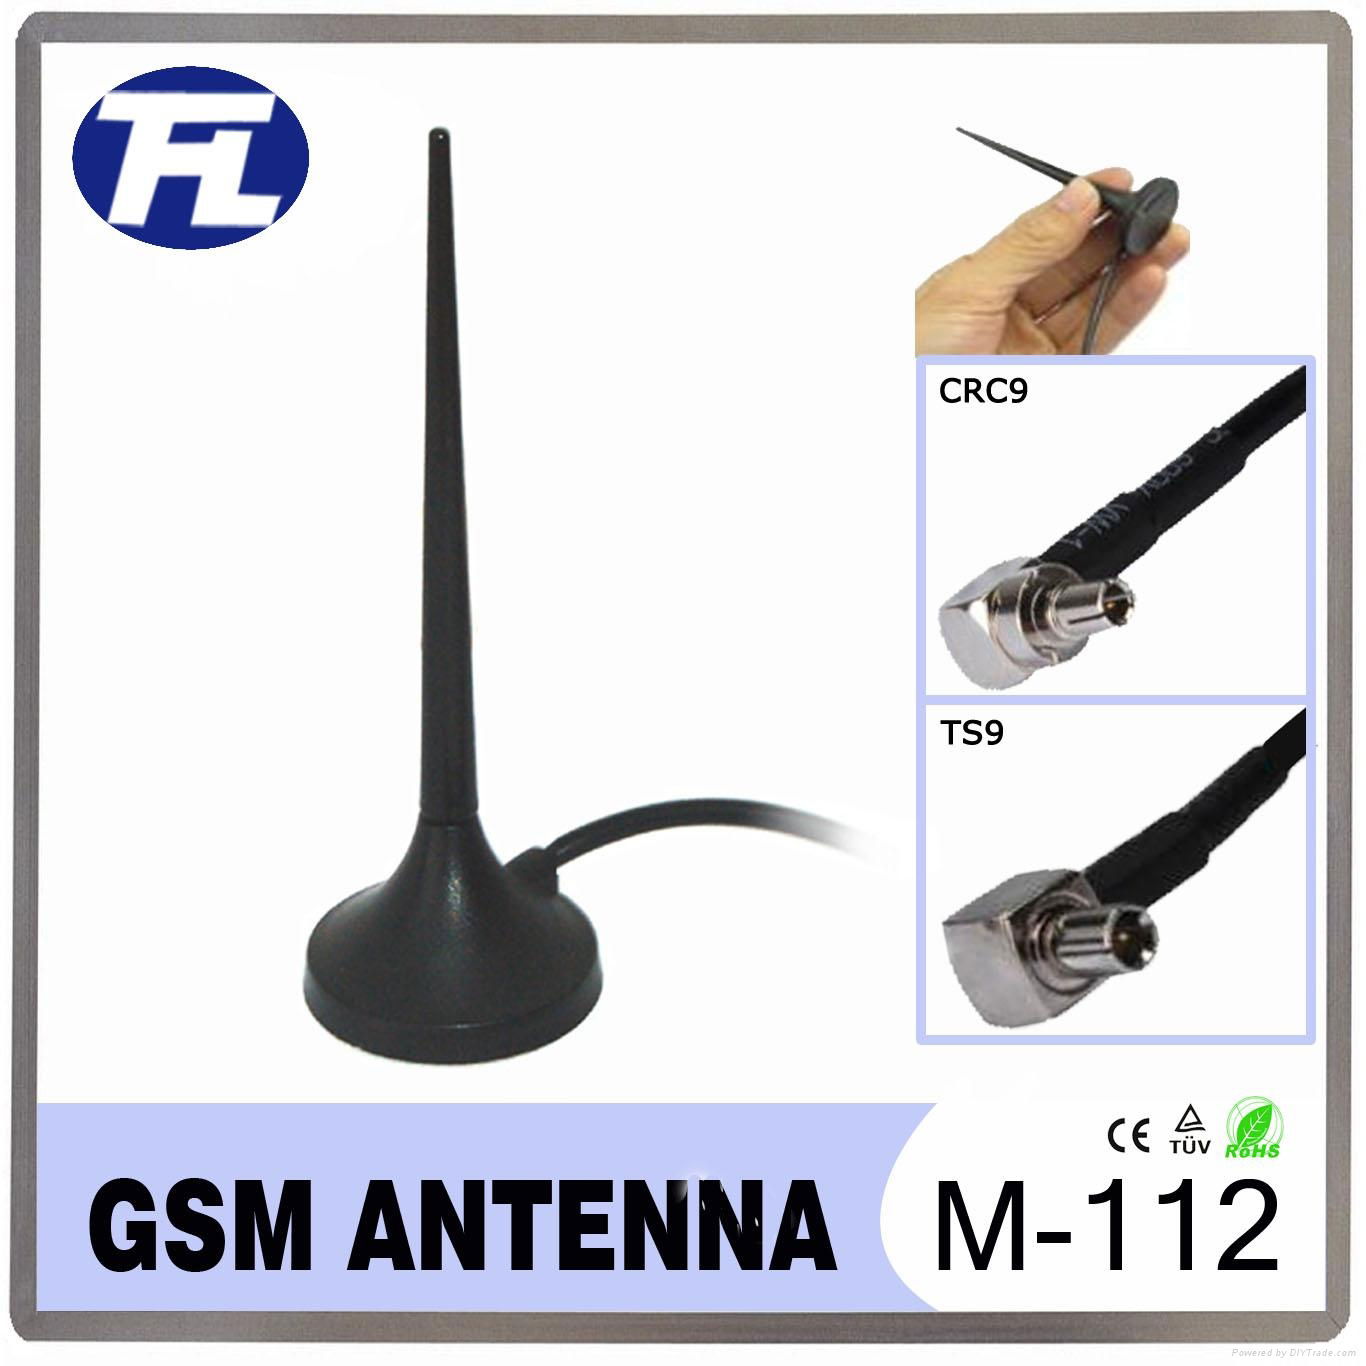 Magnetic Base GSM UMTS HSPA CDMA 3G Antenna CRC9 TS9 Connect for Huawei Modem 4